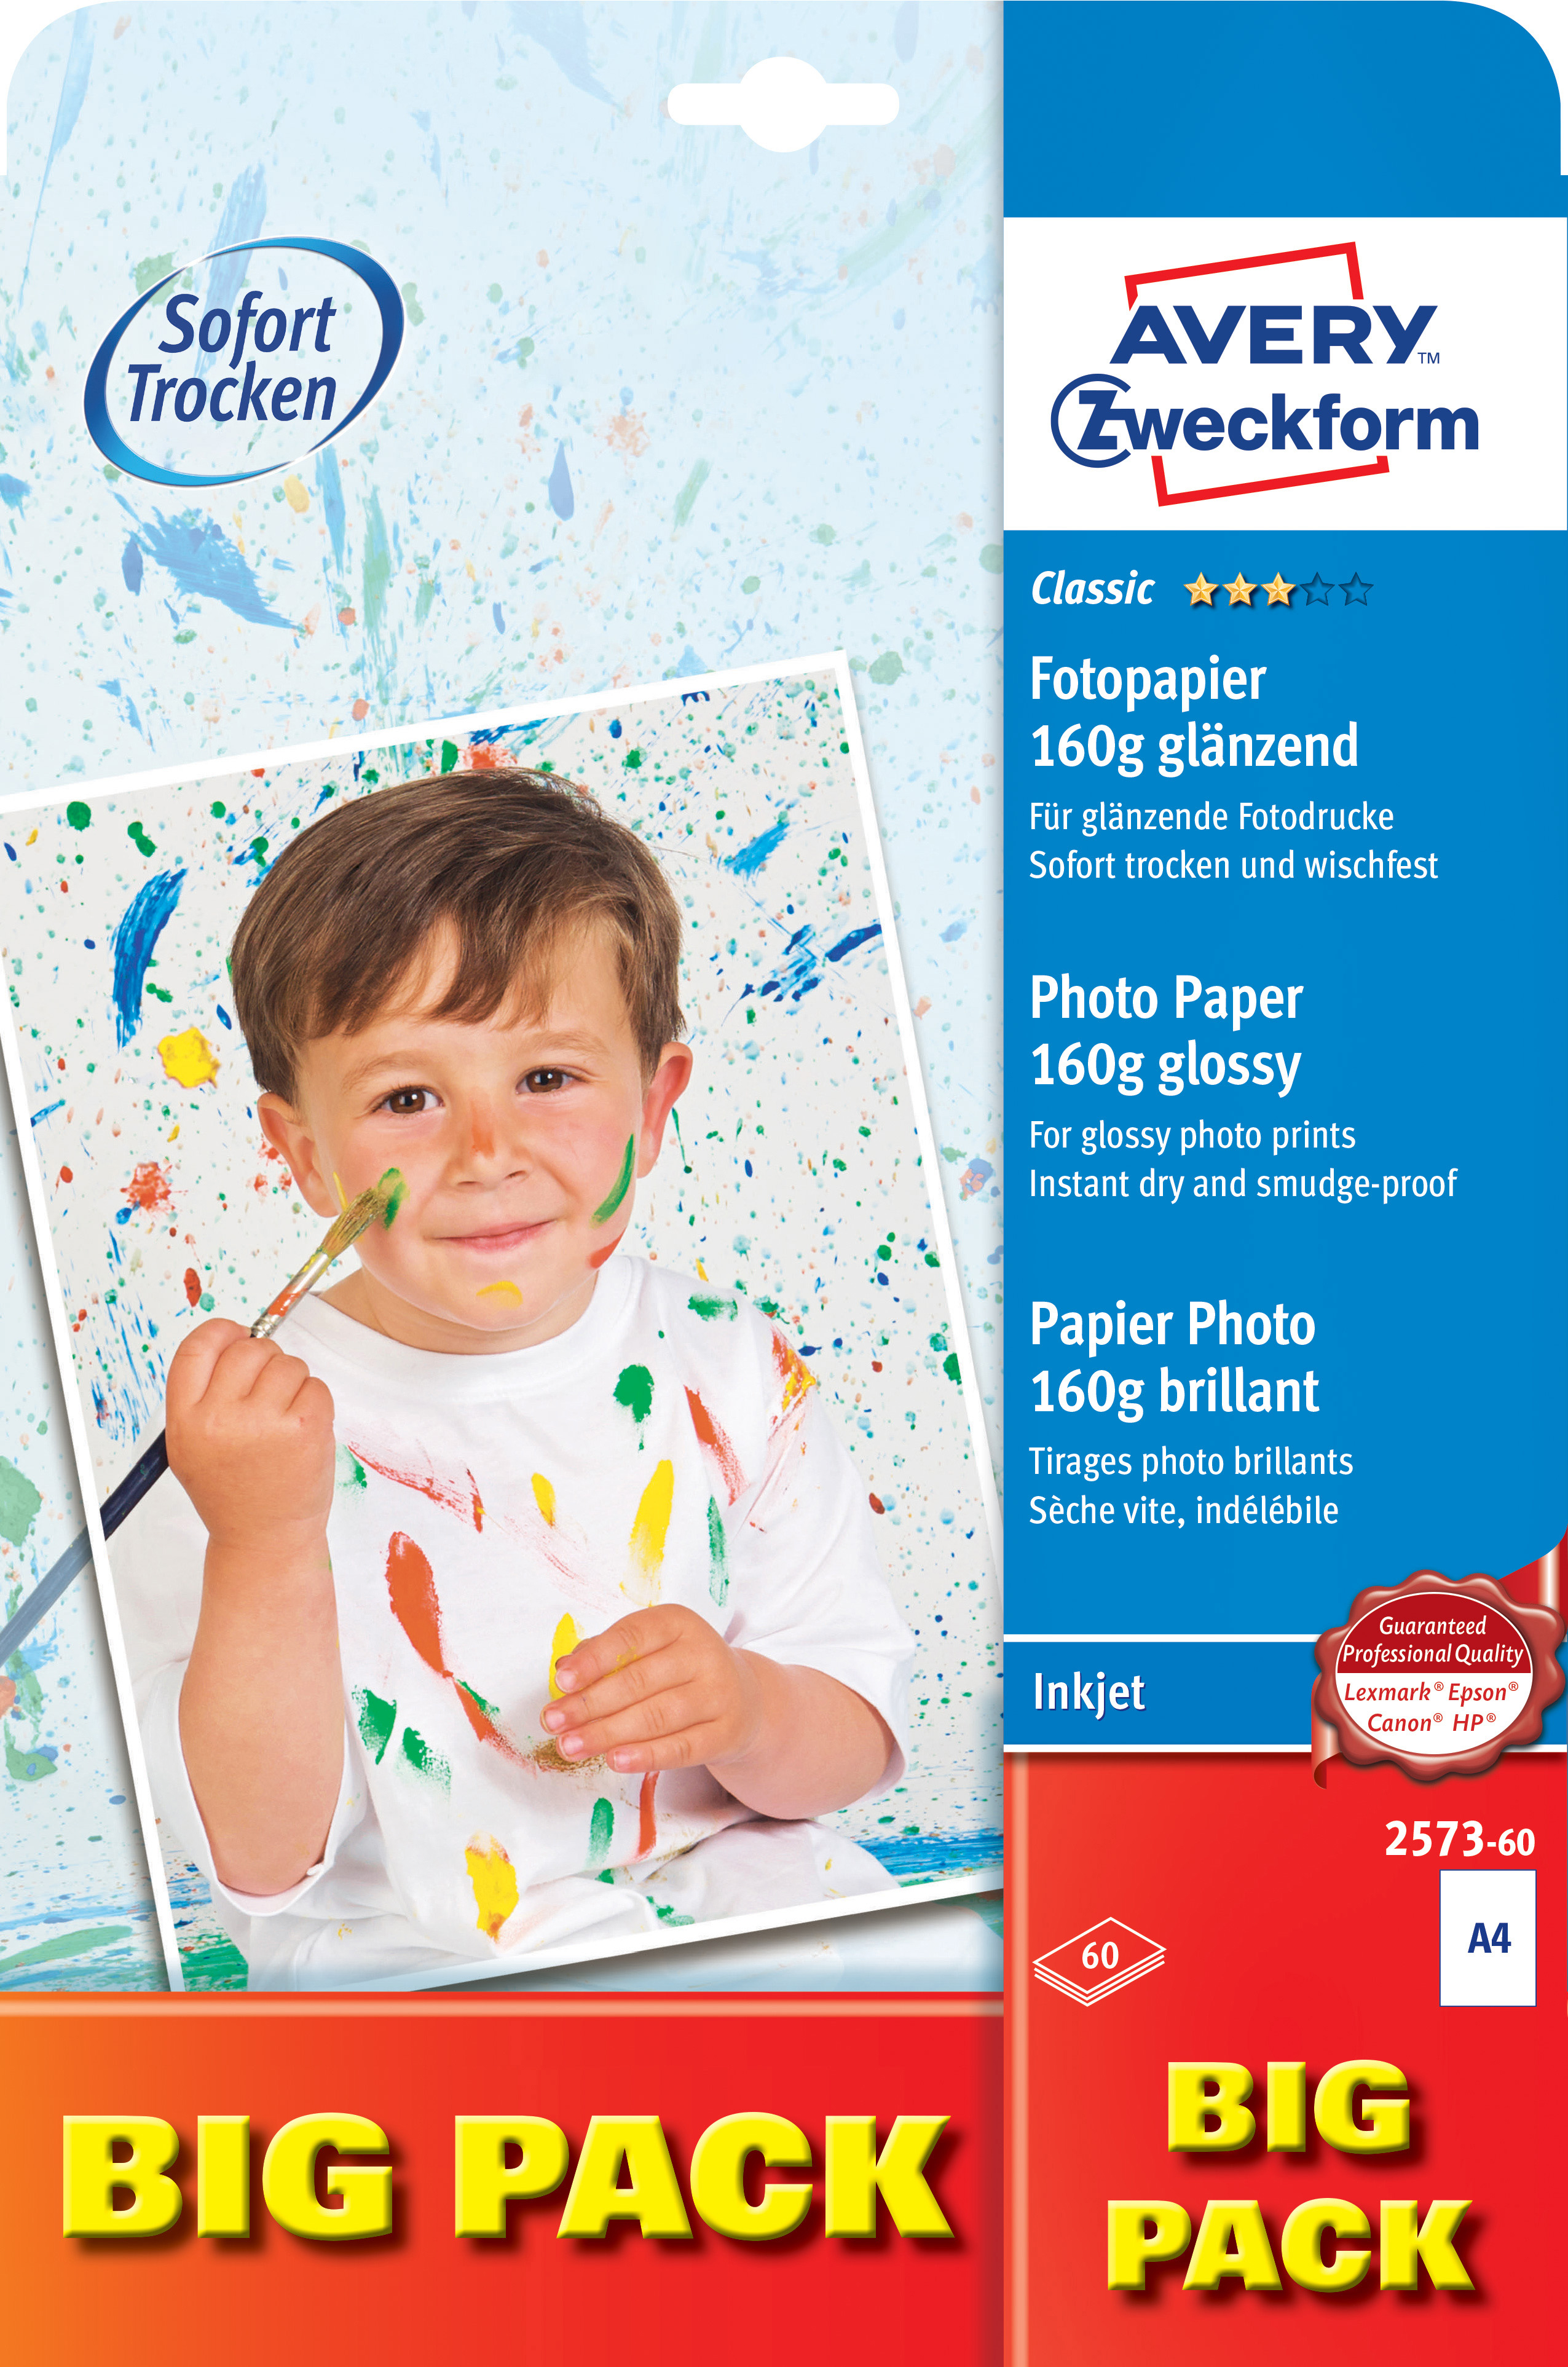 AVERY ZWECKFORM InkJet Photo Paper A4 2573-60 160g,glossy, blanc 60 feuilles